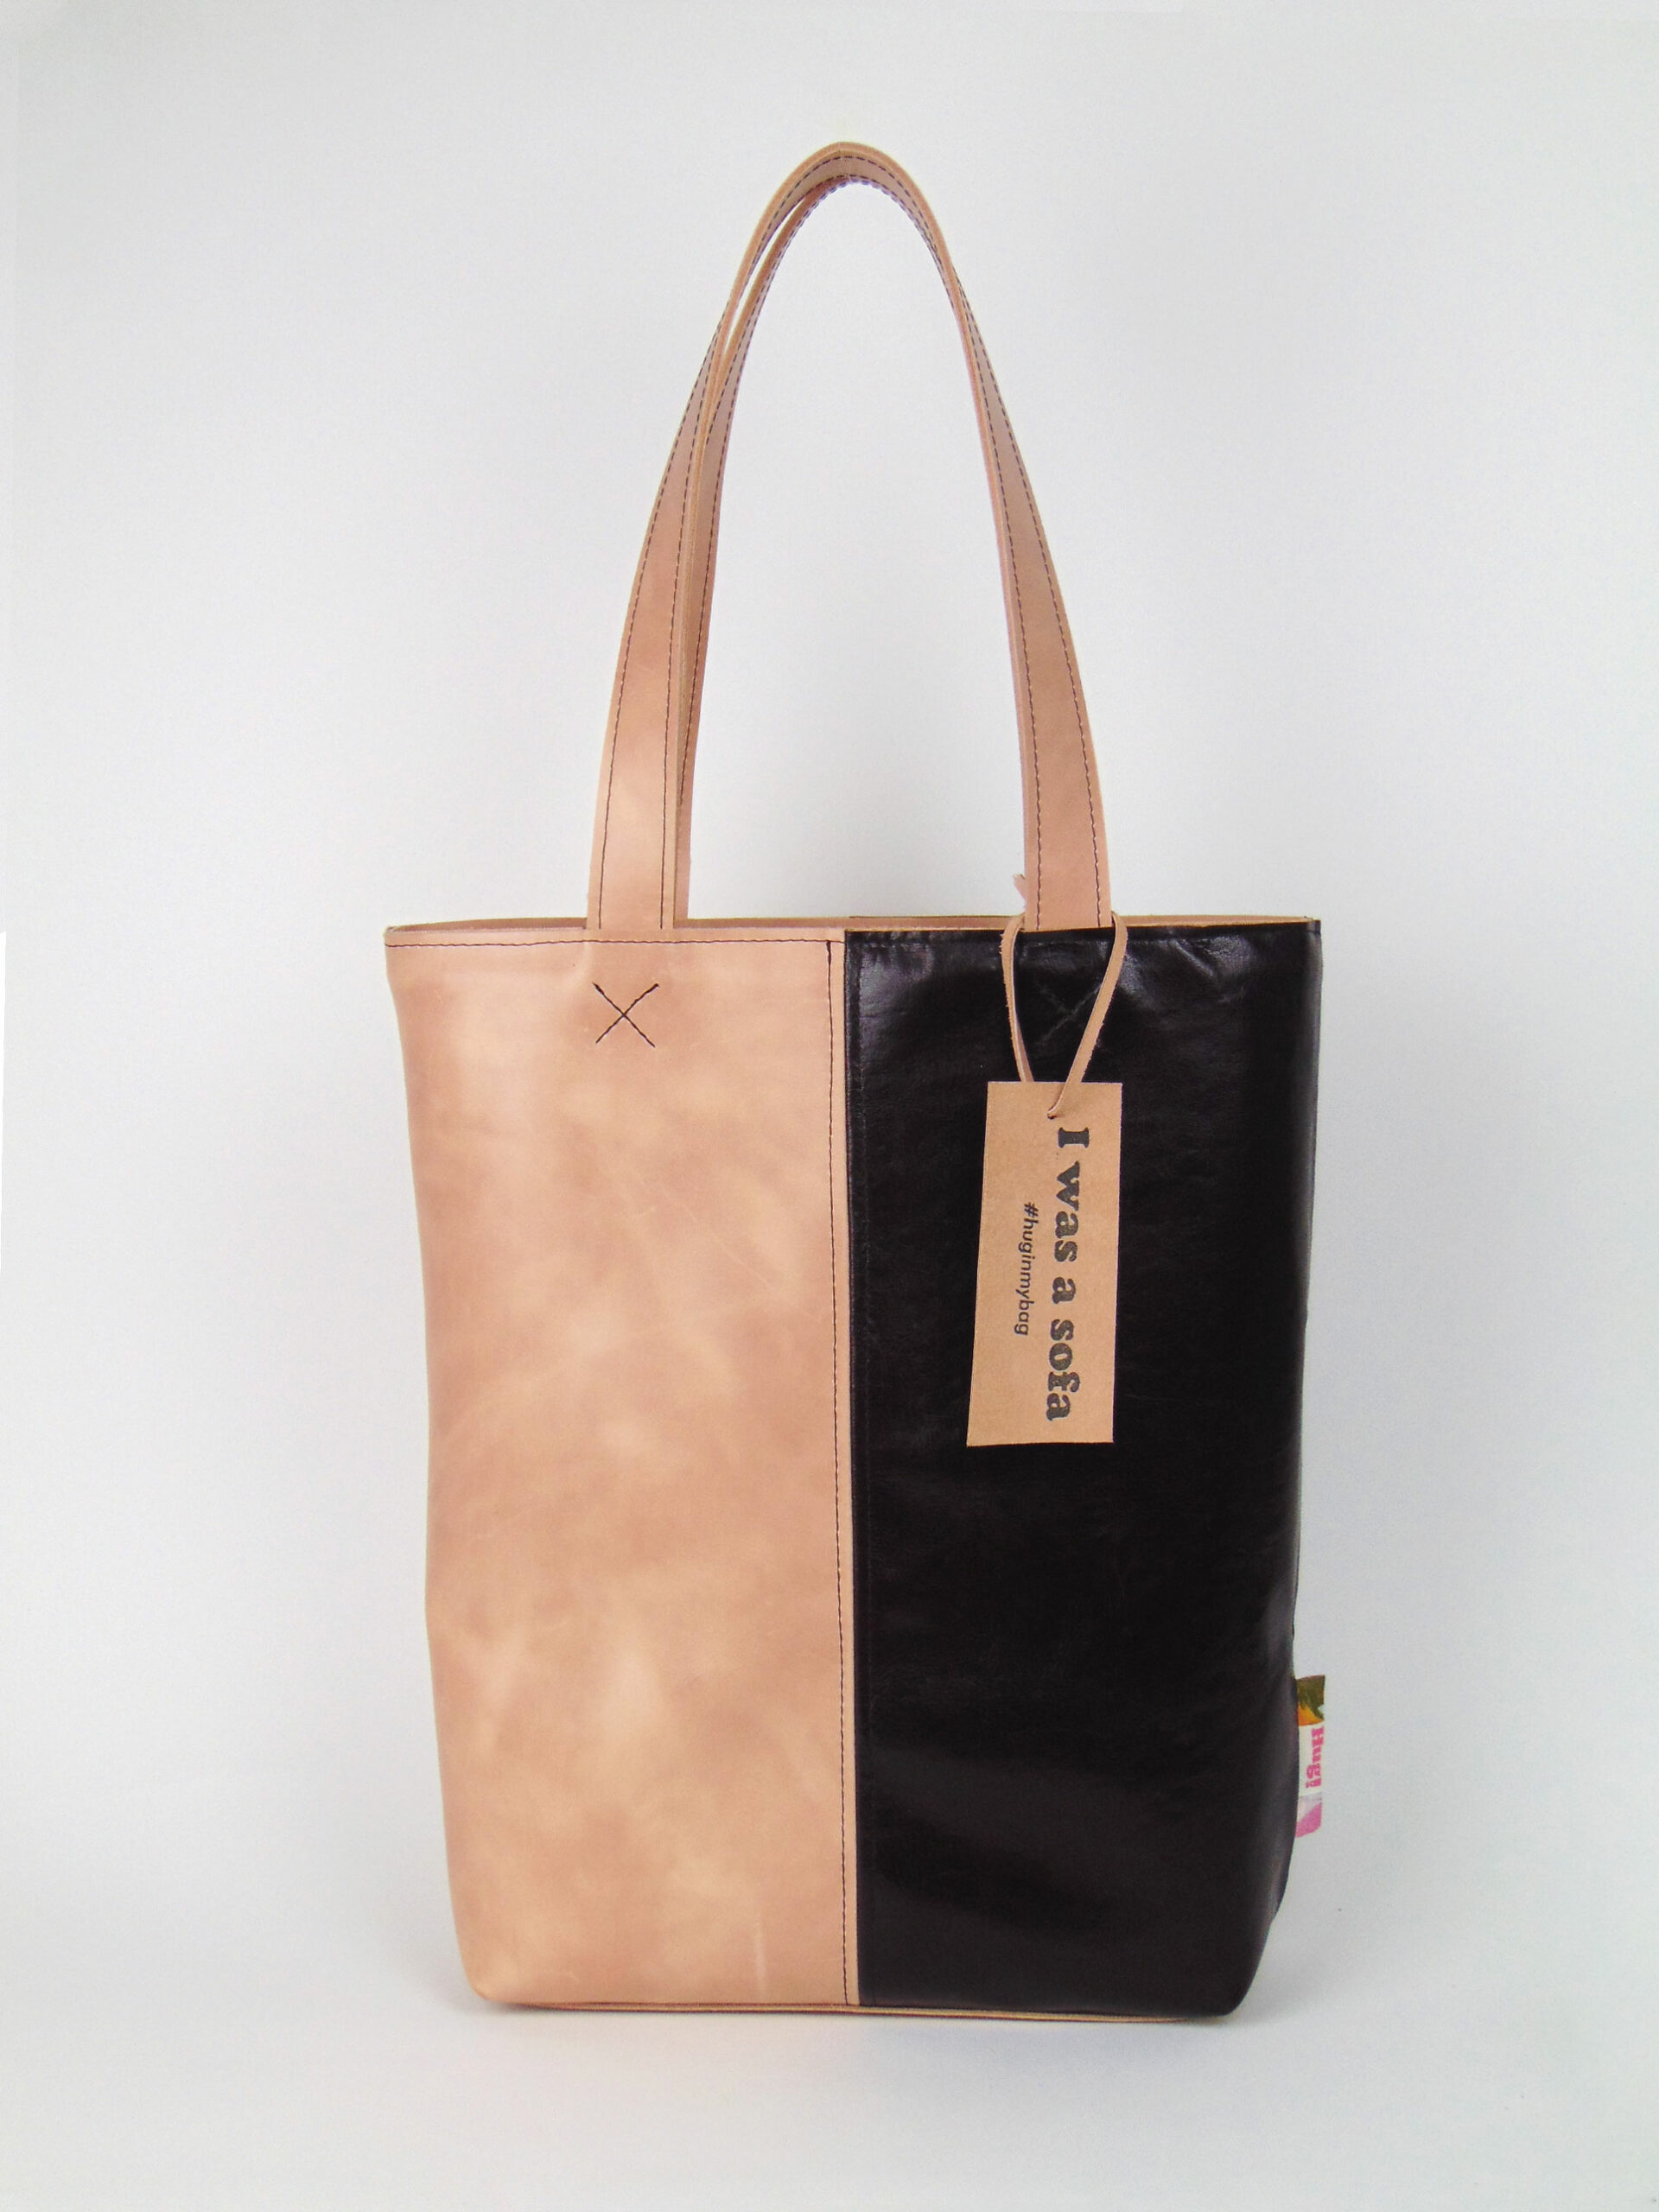 Product image of the shopper named Girl Boss. This shopper is made from recycled leather in a colour combination of nude and brown.